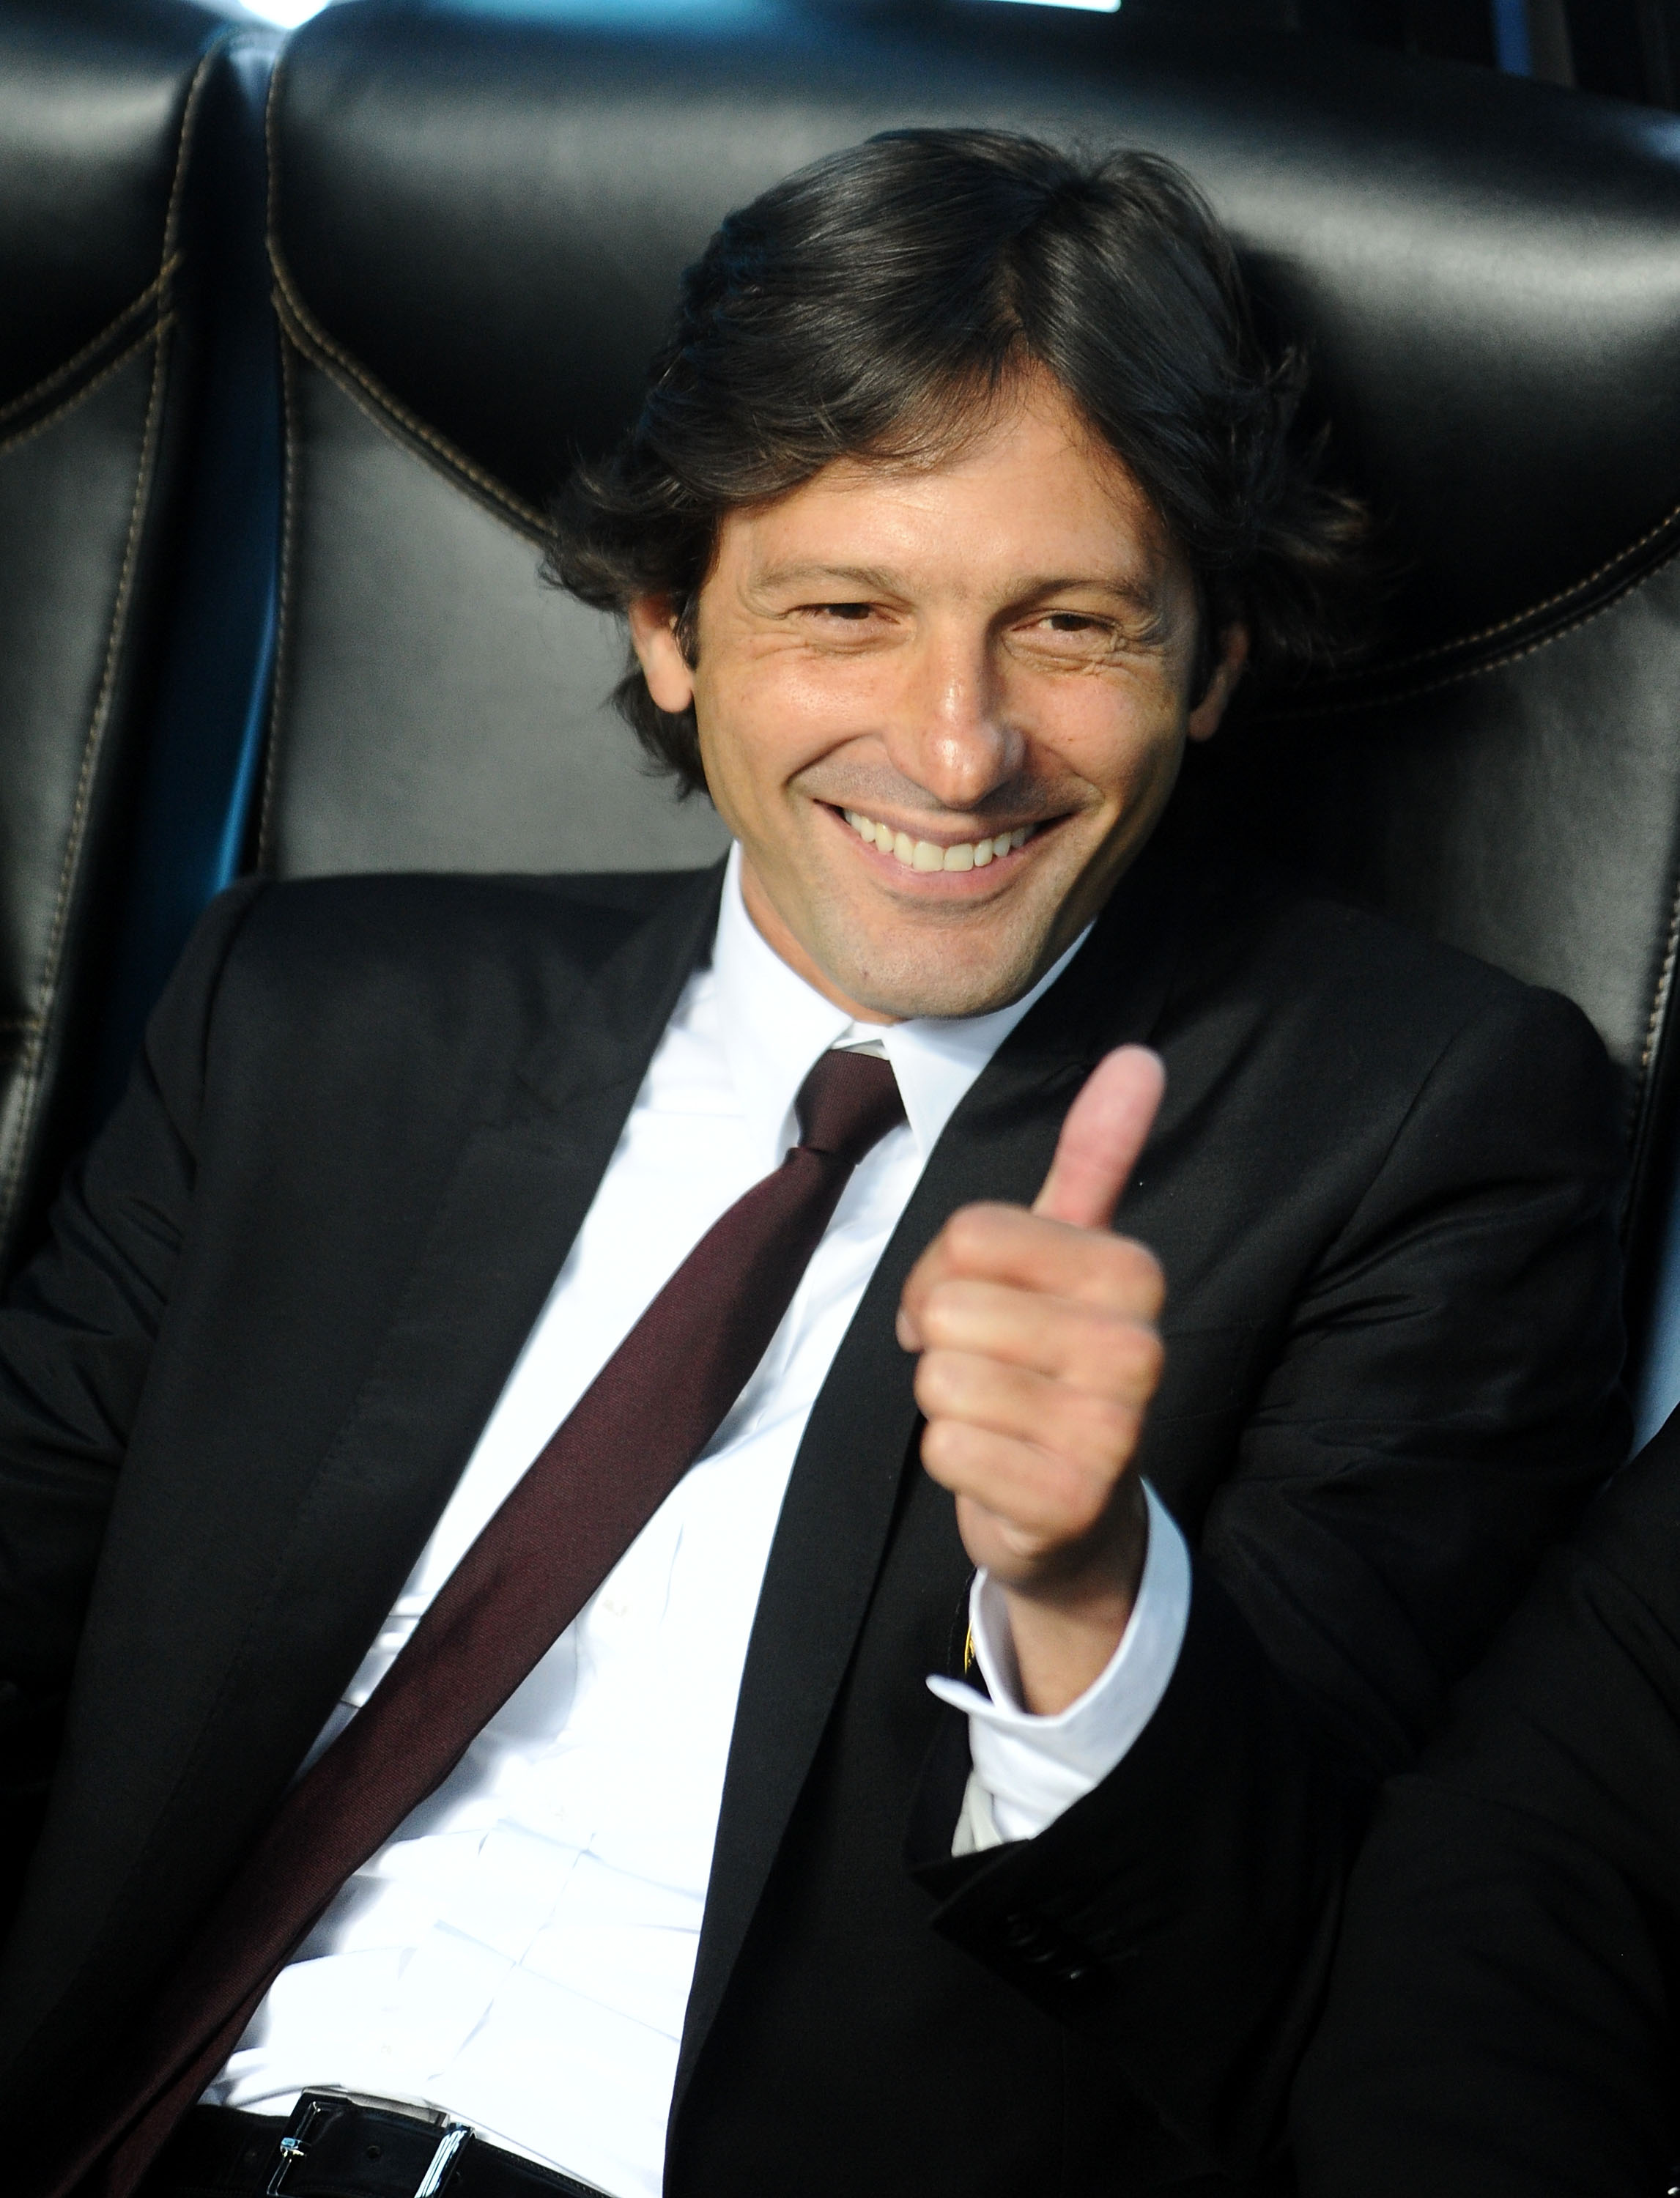 MILAN, ITALY - MAY 15: Head coach Leonardo of AC Milan gives a thumbs up during the Serie A match between AC Milan and Juventus FC at Stadio Giuseppe Meazza on May 15, 2010 in Milan, Italy. (Photo by Massimo Cebrelli/Getty Images)